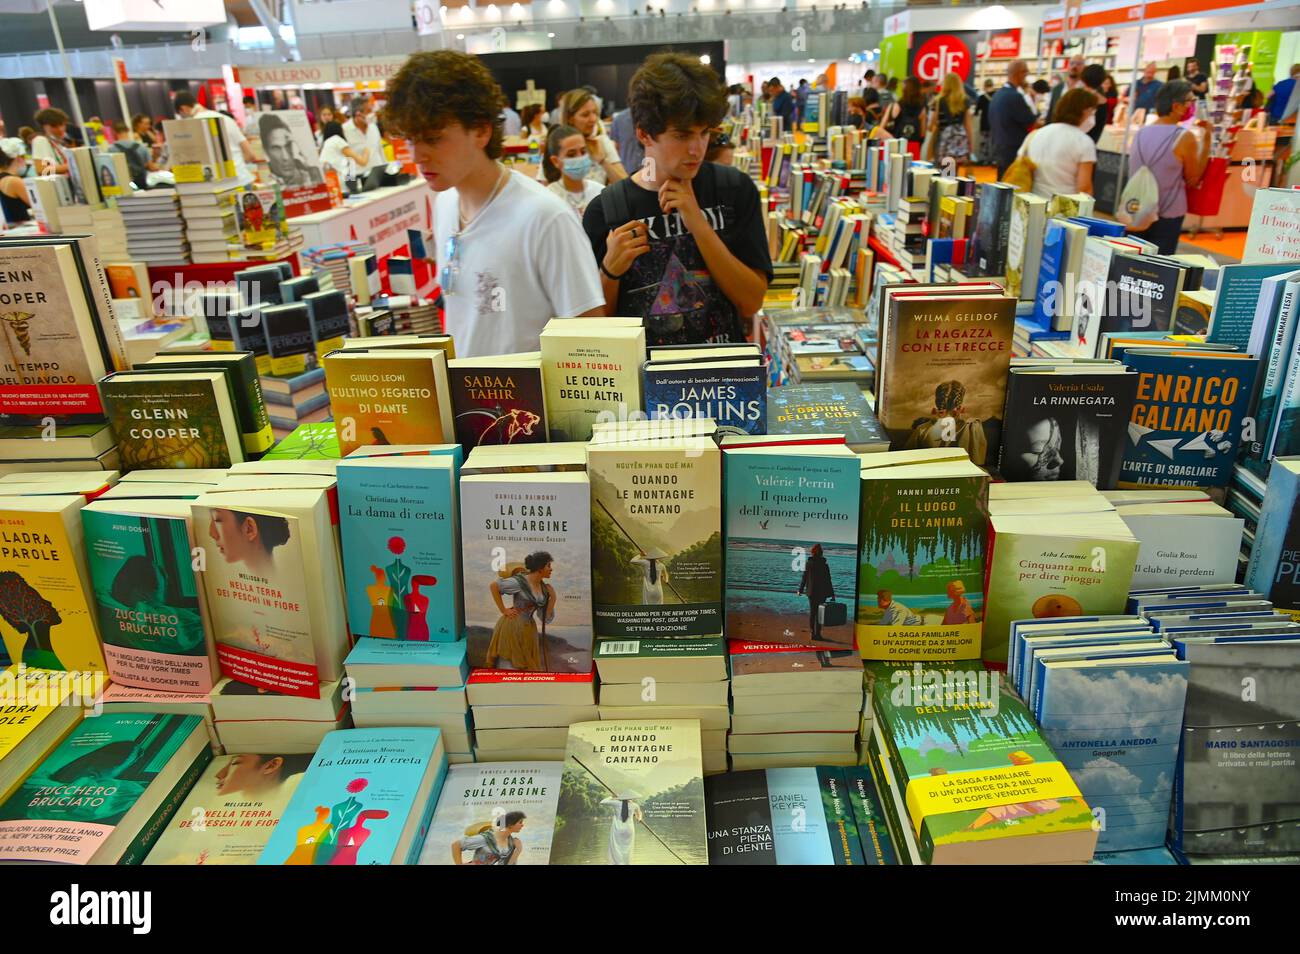 Several people seeking for books at international book fair in Turin, Italy Stock Photo